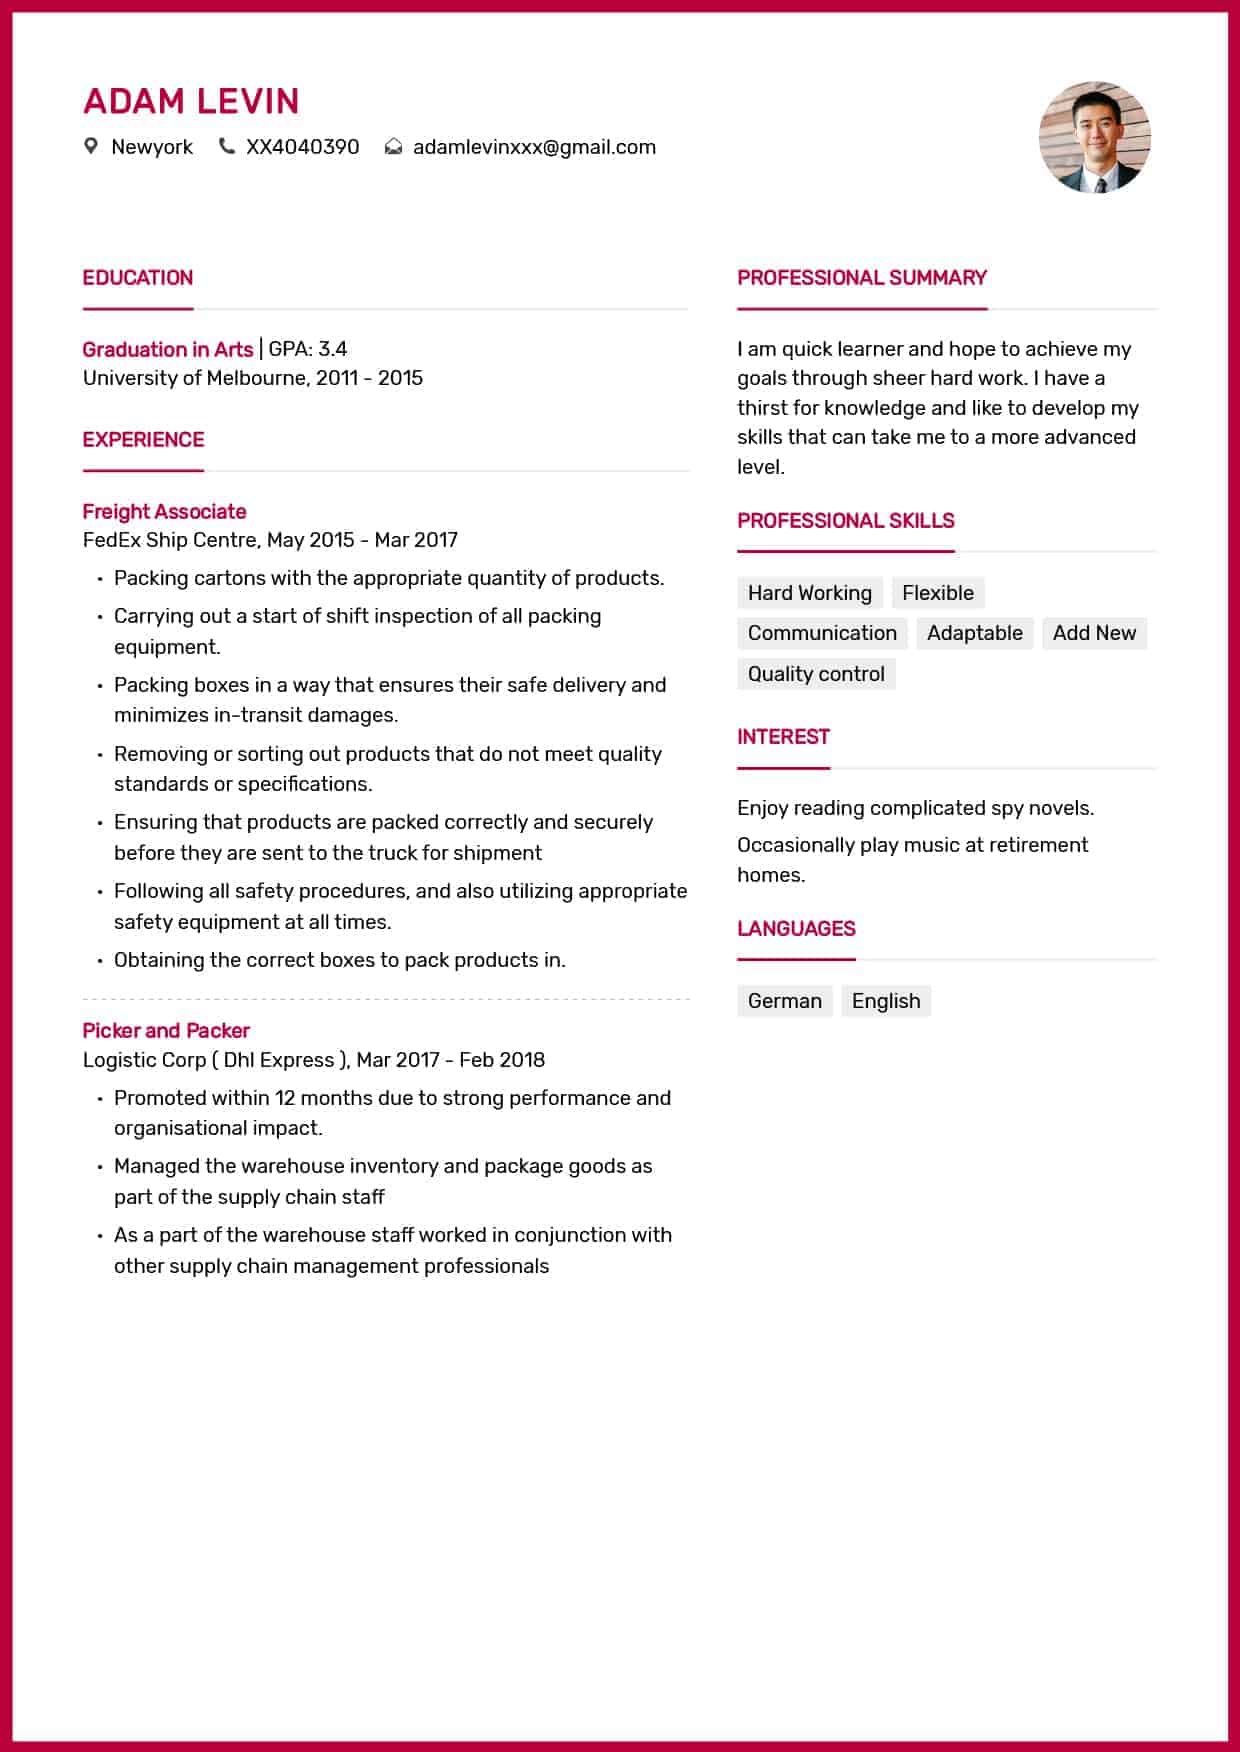 Example Of A Resume Resume Example Picker 1 example of a resume|wikiresume.com